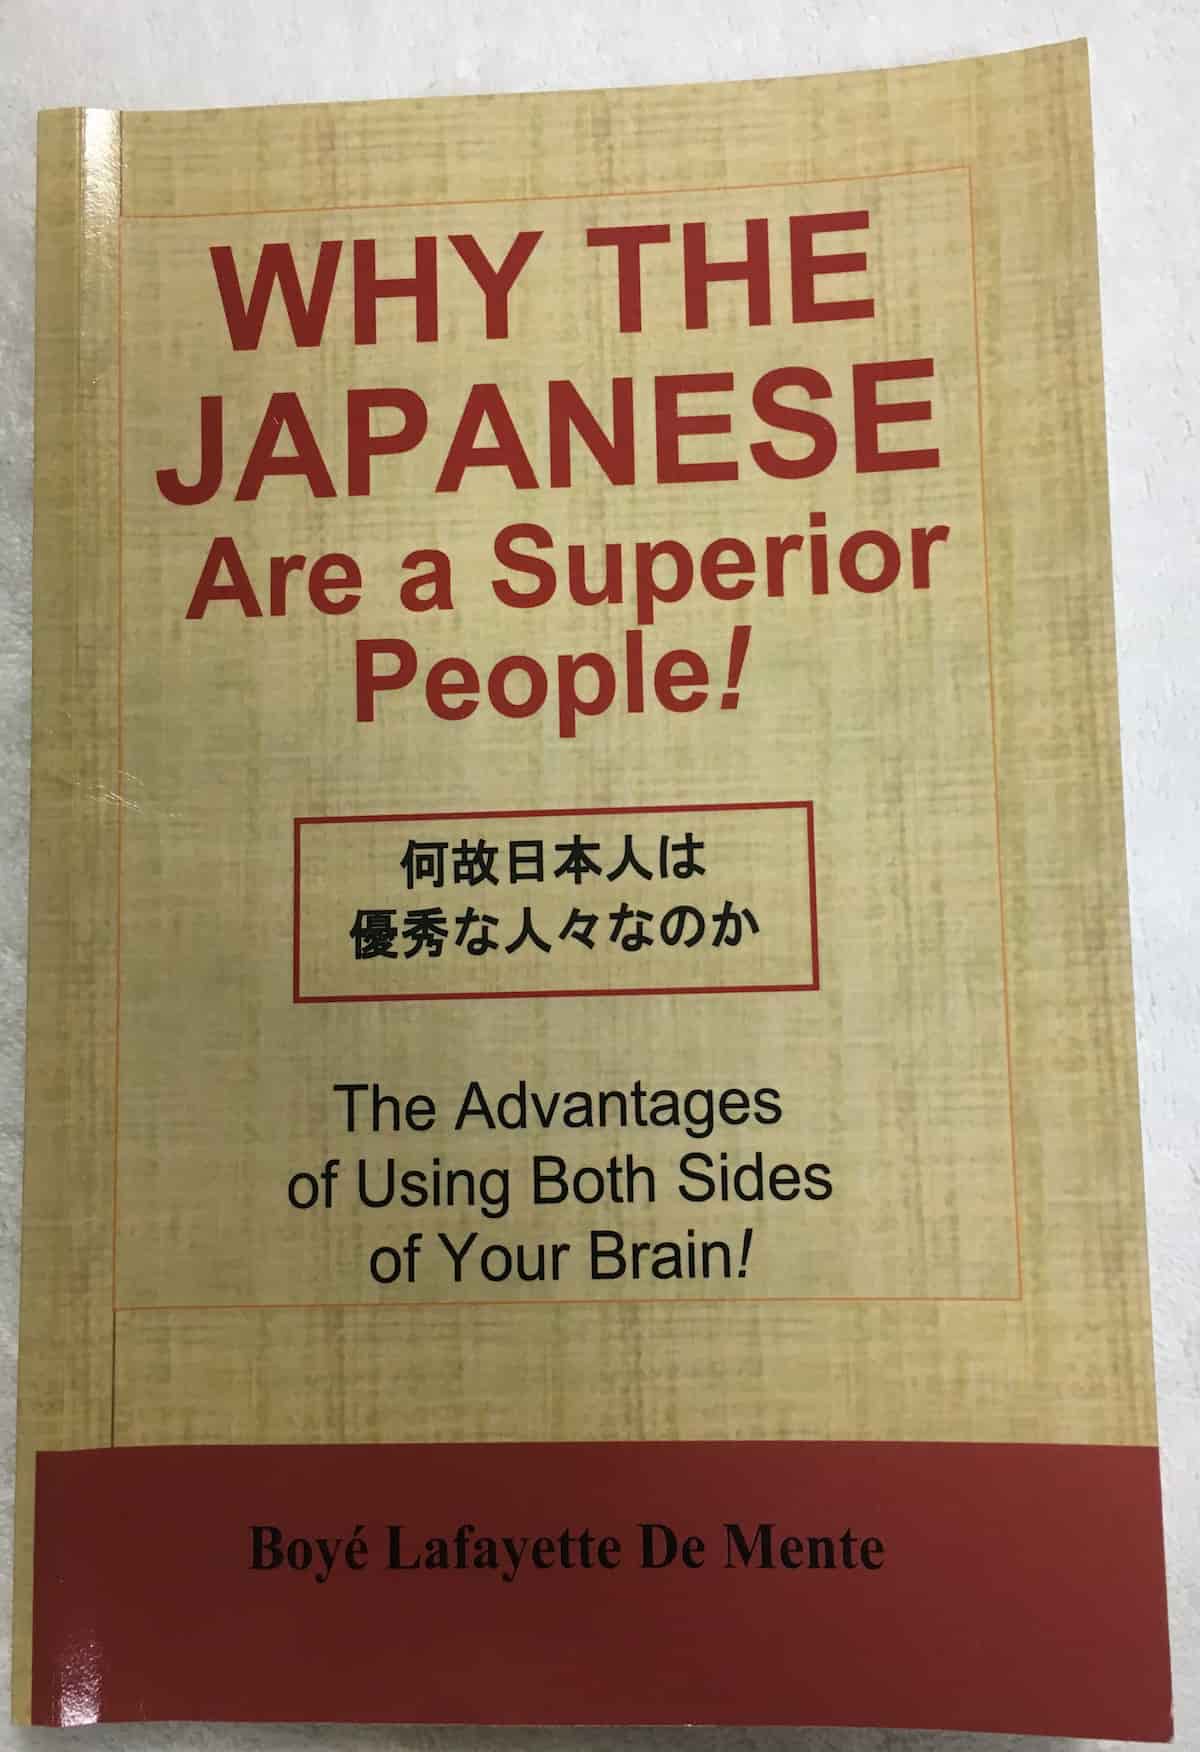 Why the Japanese are superior people - the advantage of using both sides of your brain